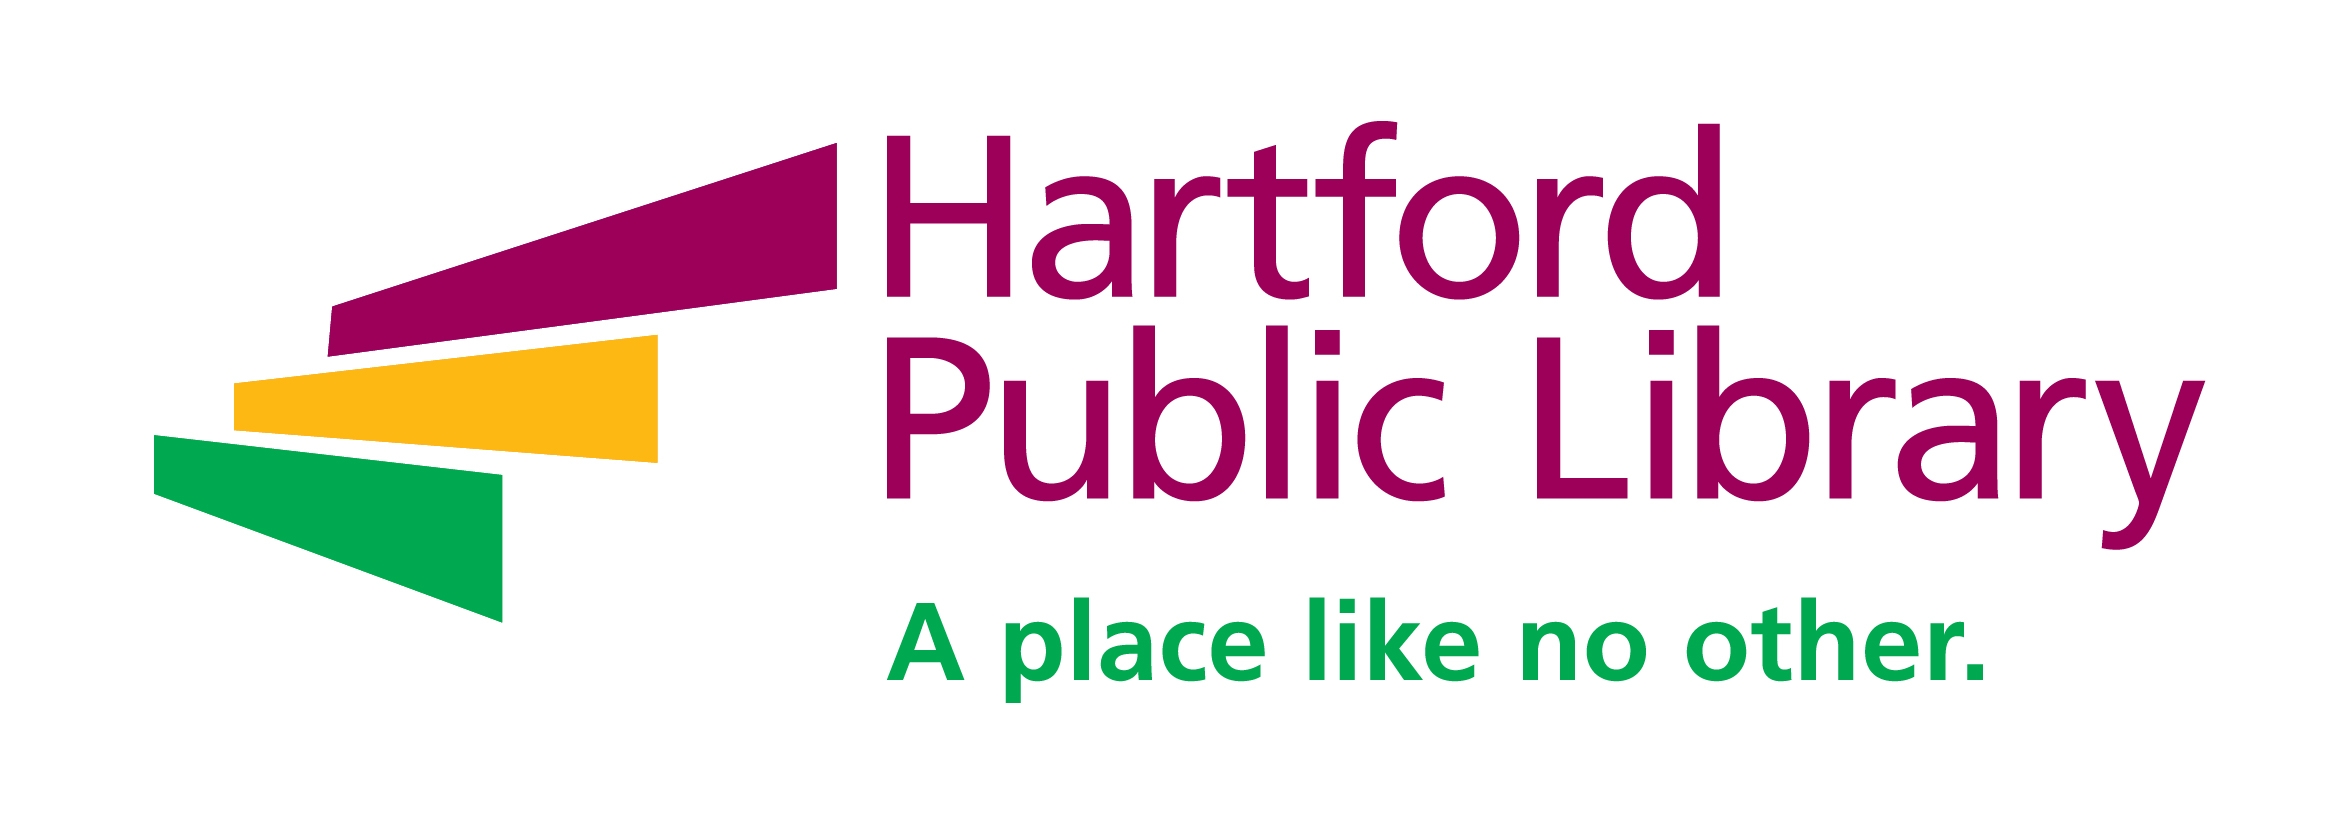 HARTFORD PUBLIC LIBRARY ANNOUNCES LAUNCH OF CAREER ONLINE HIGH SCHOOL